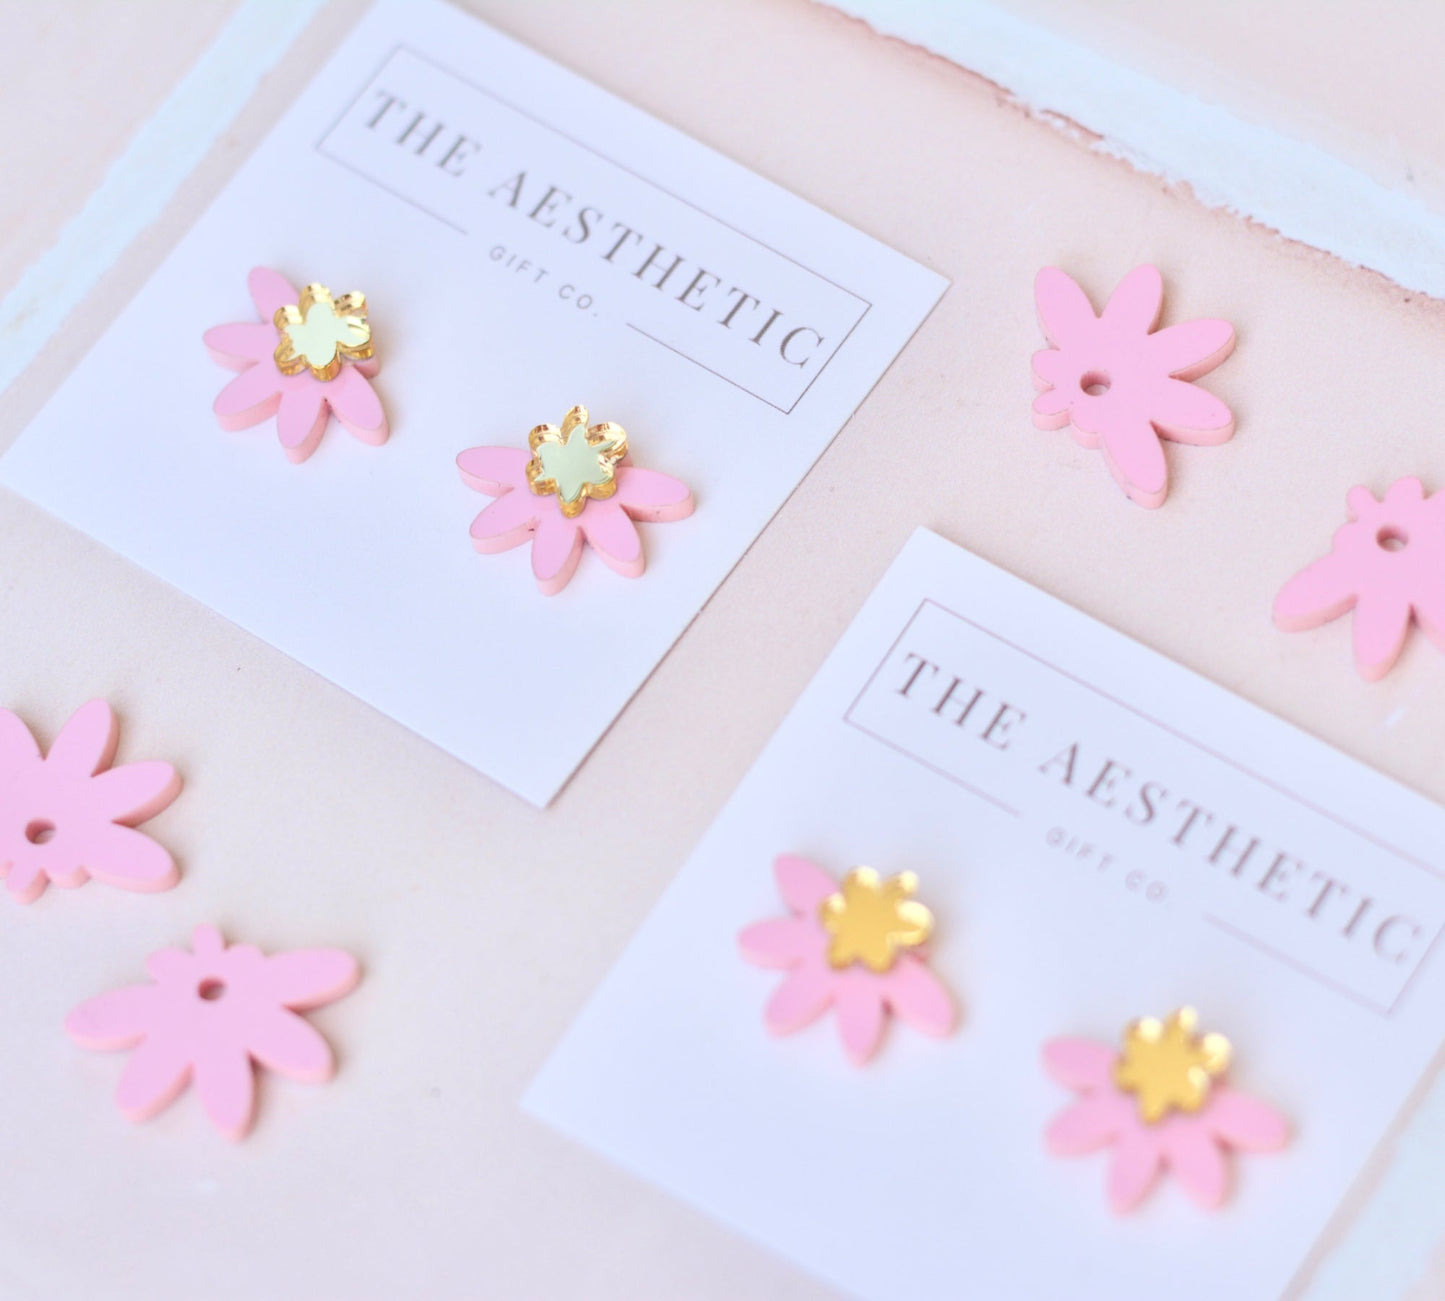 Winnie Studs - Premium  from The Aesthetic Gift Co - Just $24.99! Shop now at The Aesthetic Gift Co